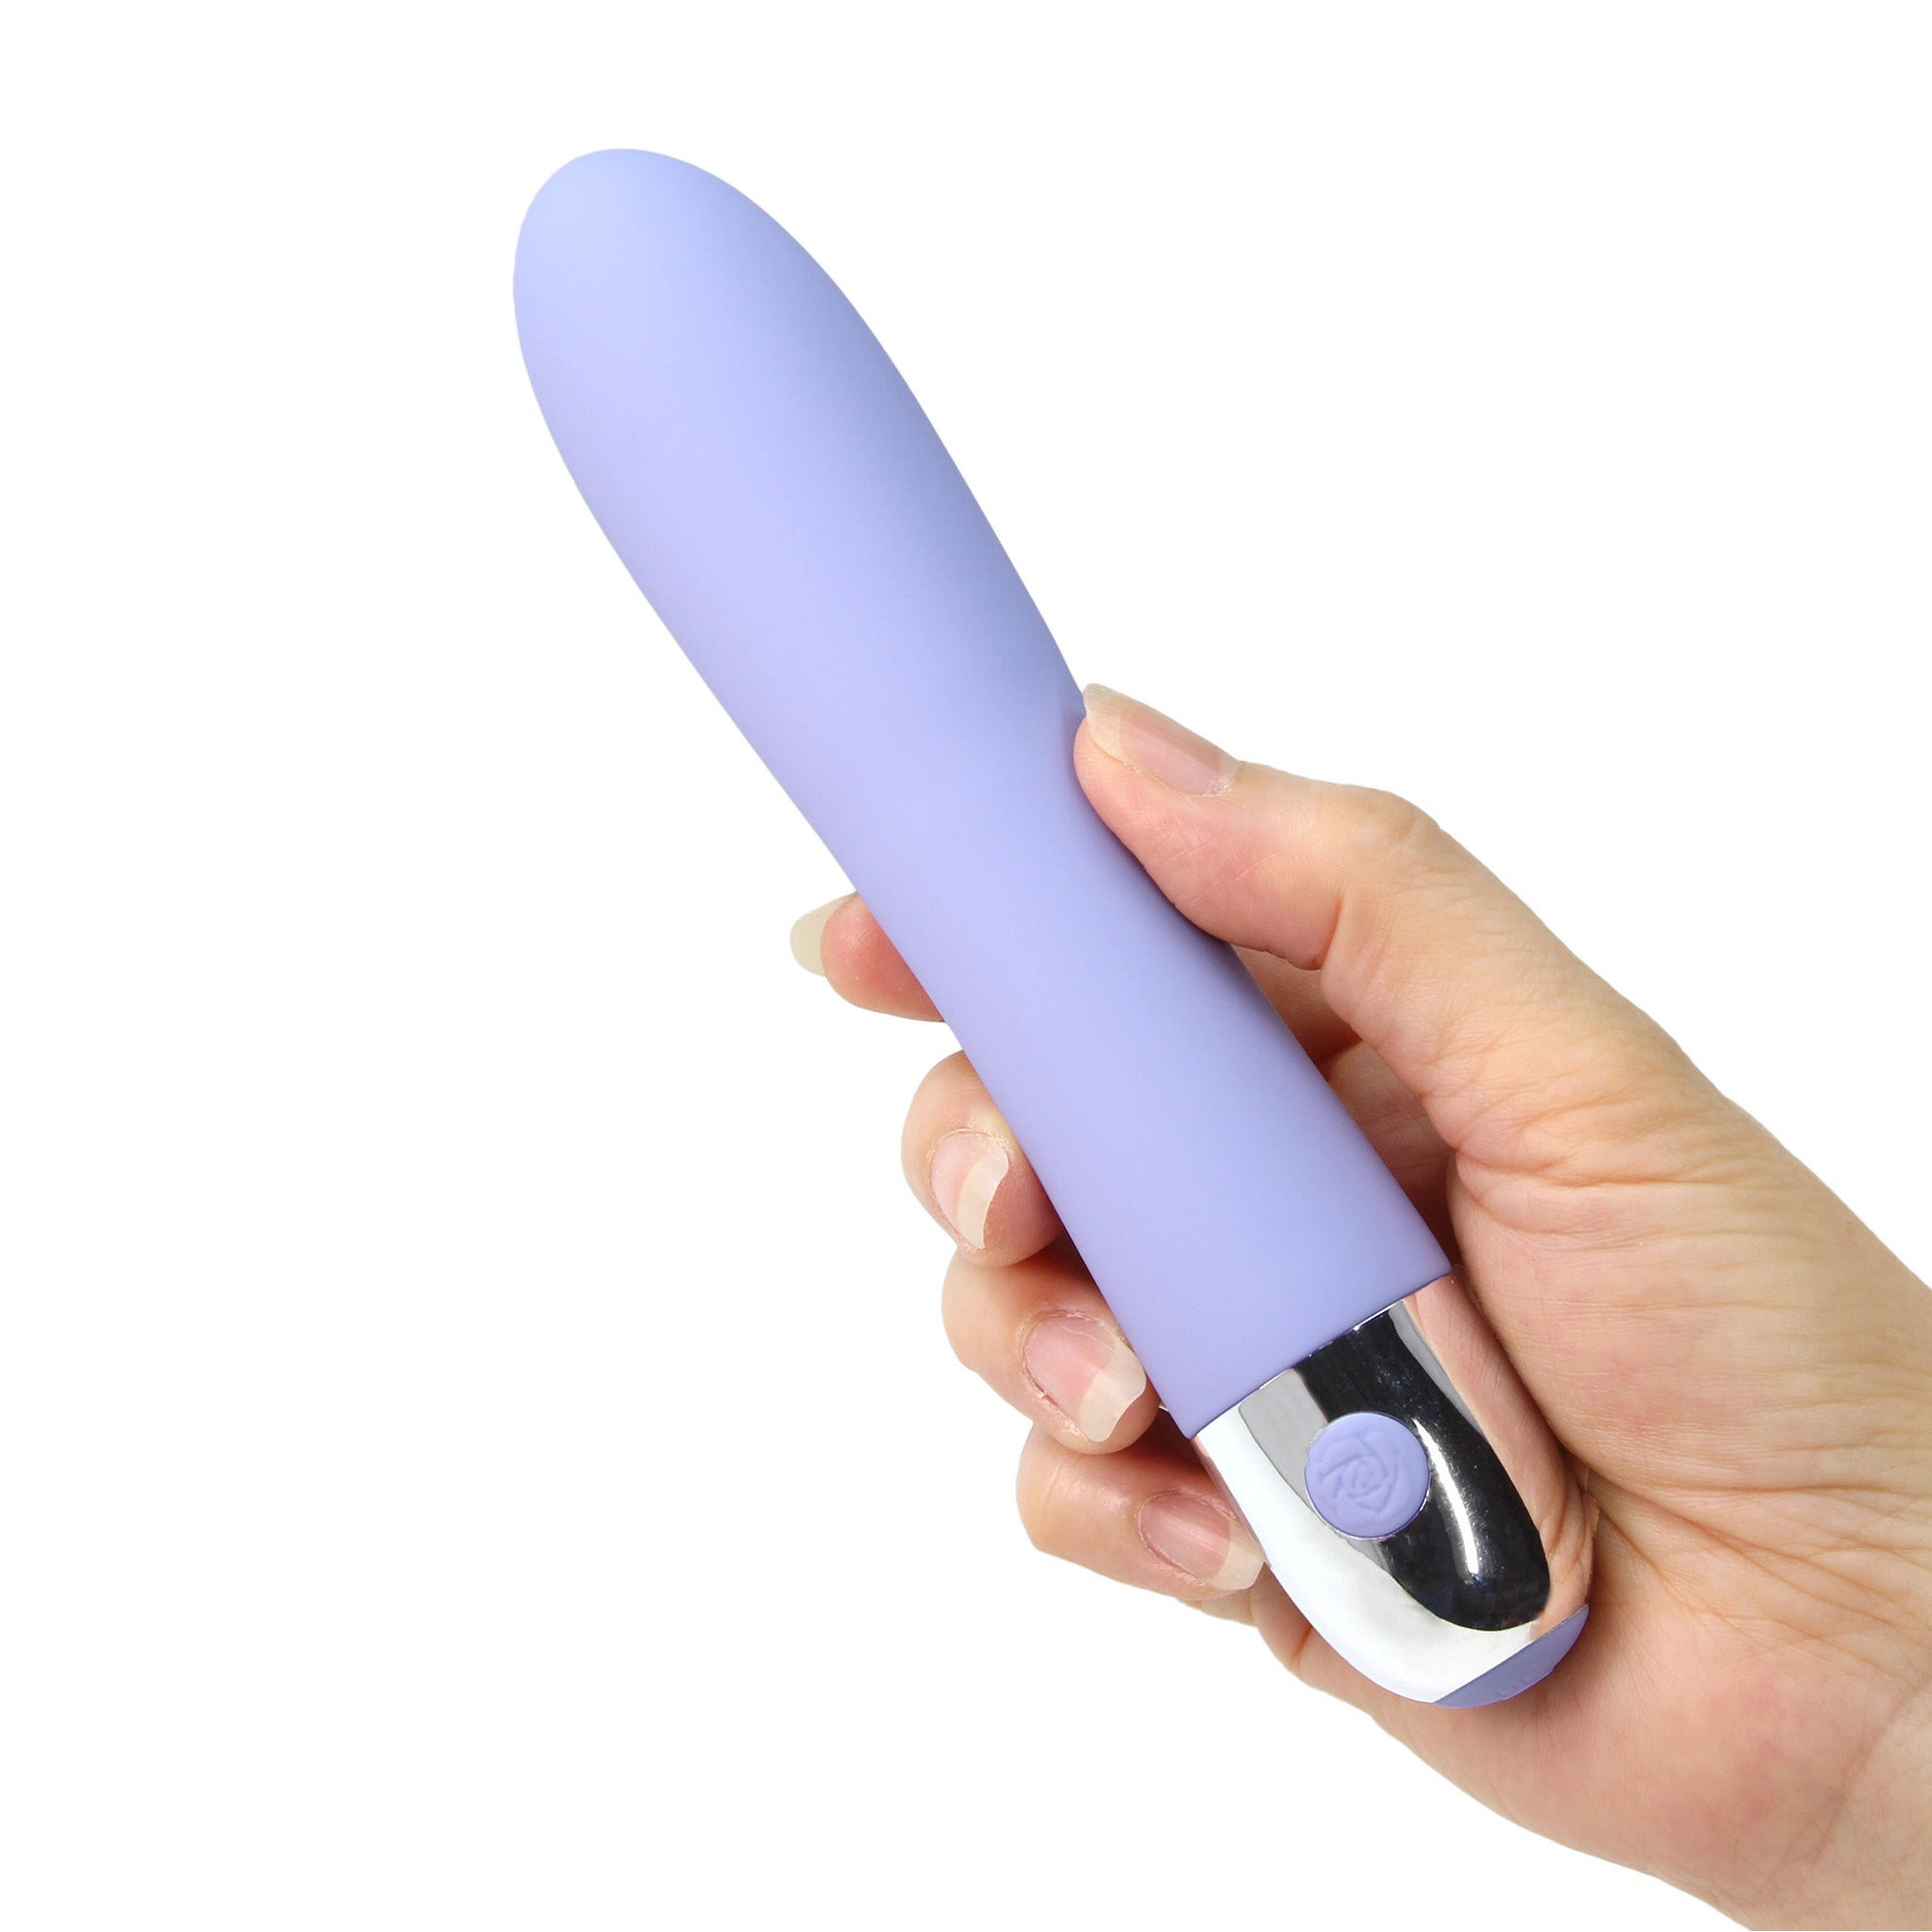 Rechargeable Silicone G-spot Anal Vibrator Massager Beginner Sex Toys for Women